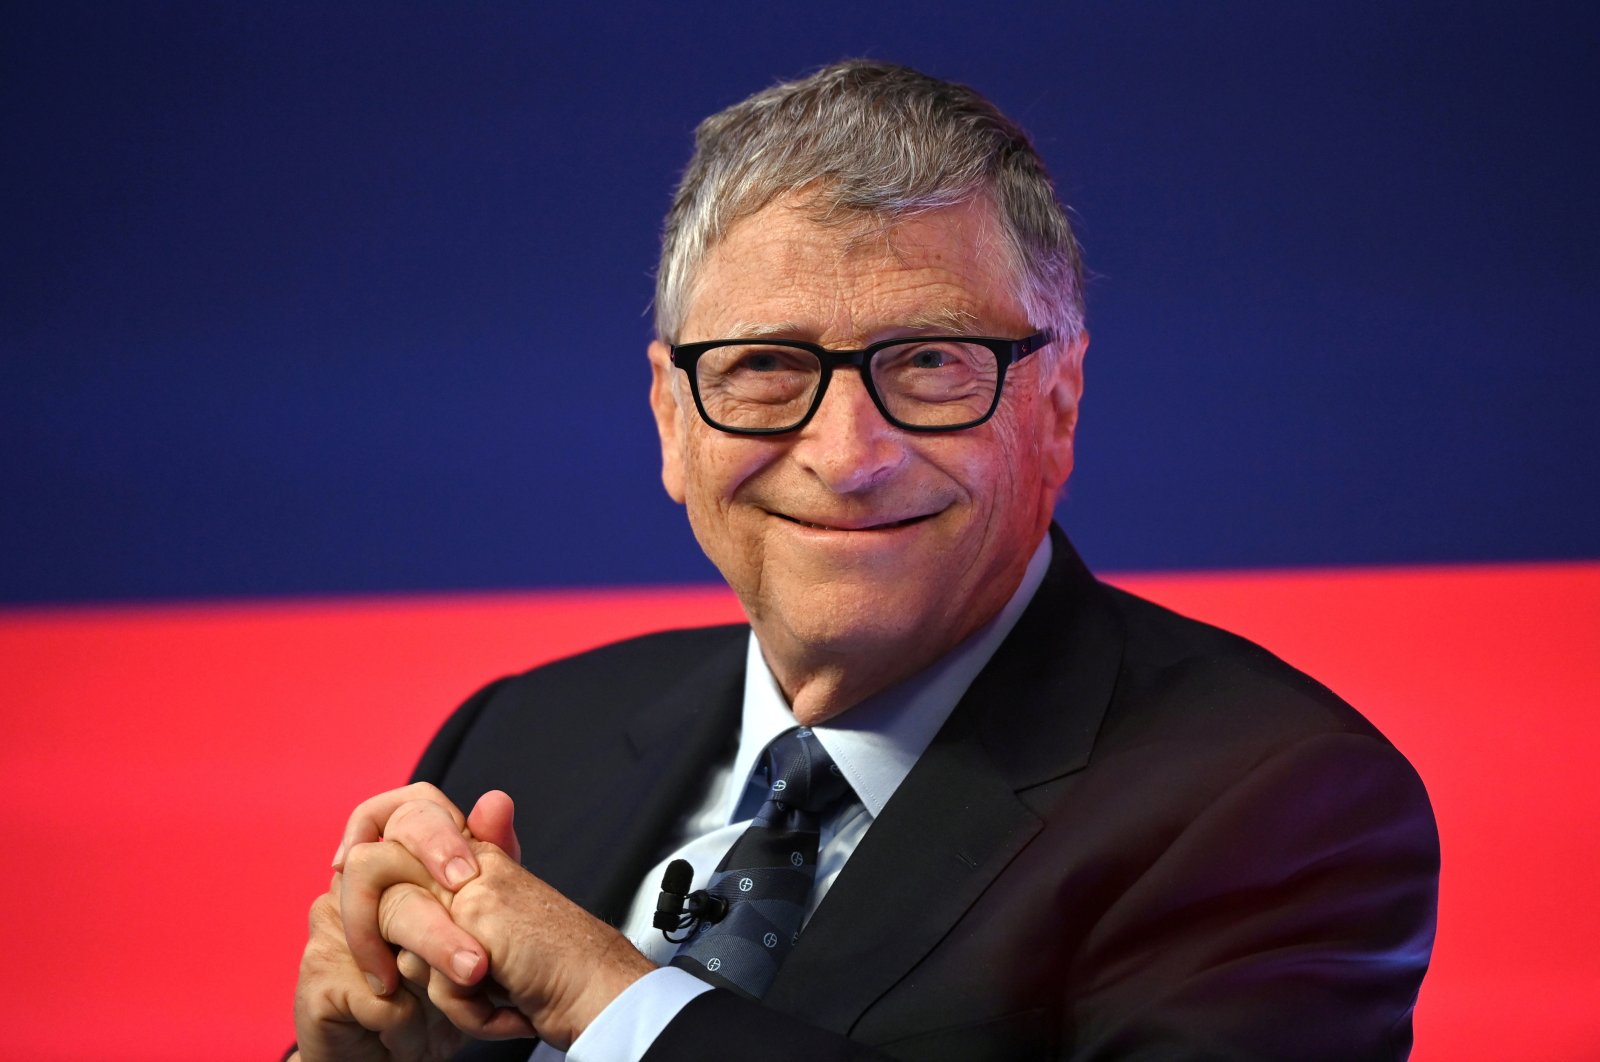 Bill Gates reacts during the Global Investment Summit at the Science Museum, in London, Britain, Oct.19, 2021. (Reuters Photo)